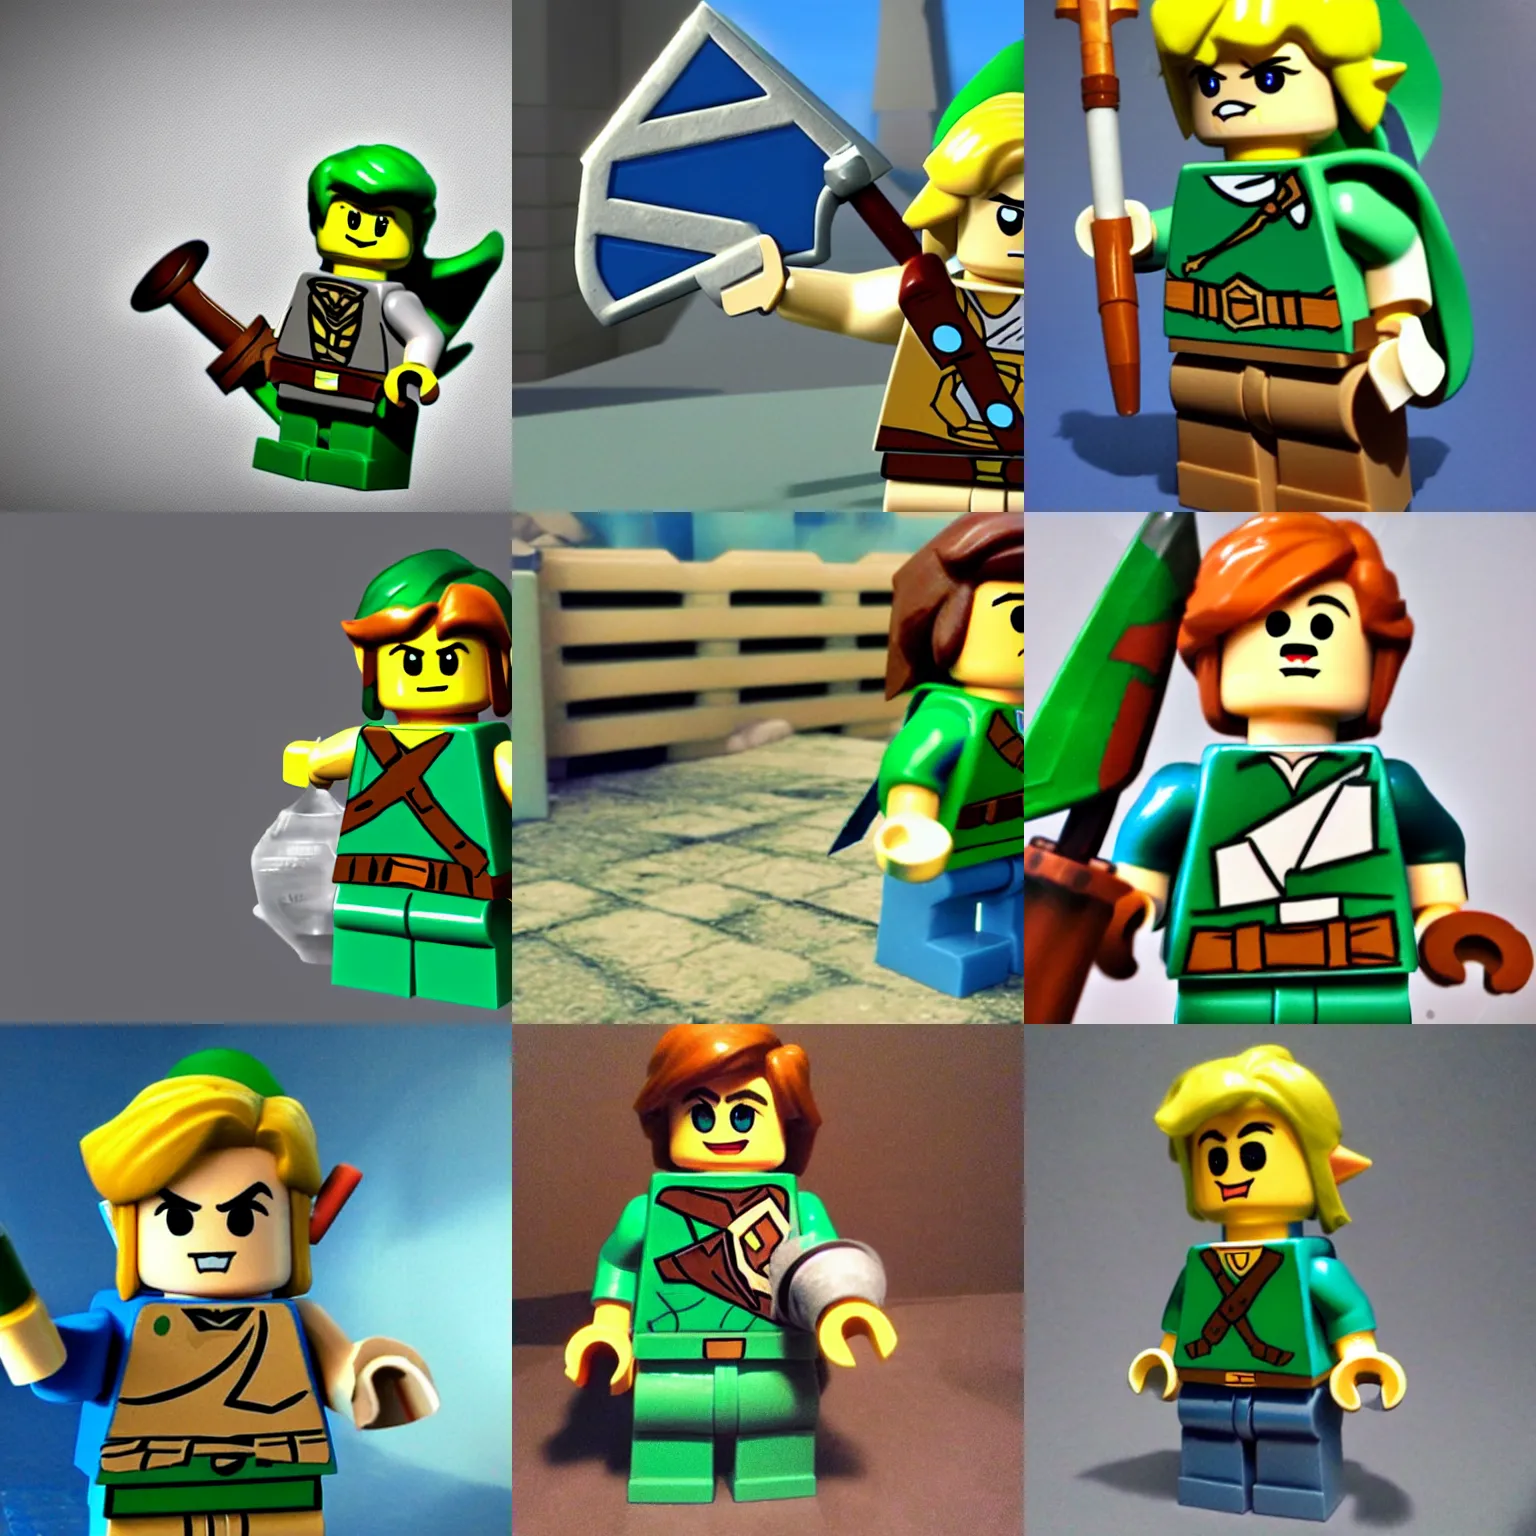 The Legend of Zelda LEGO set rumored to be in production - Xfire